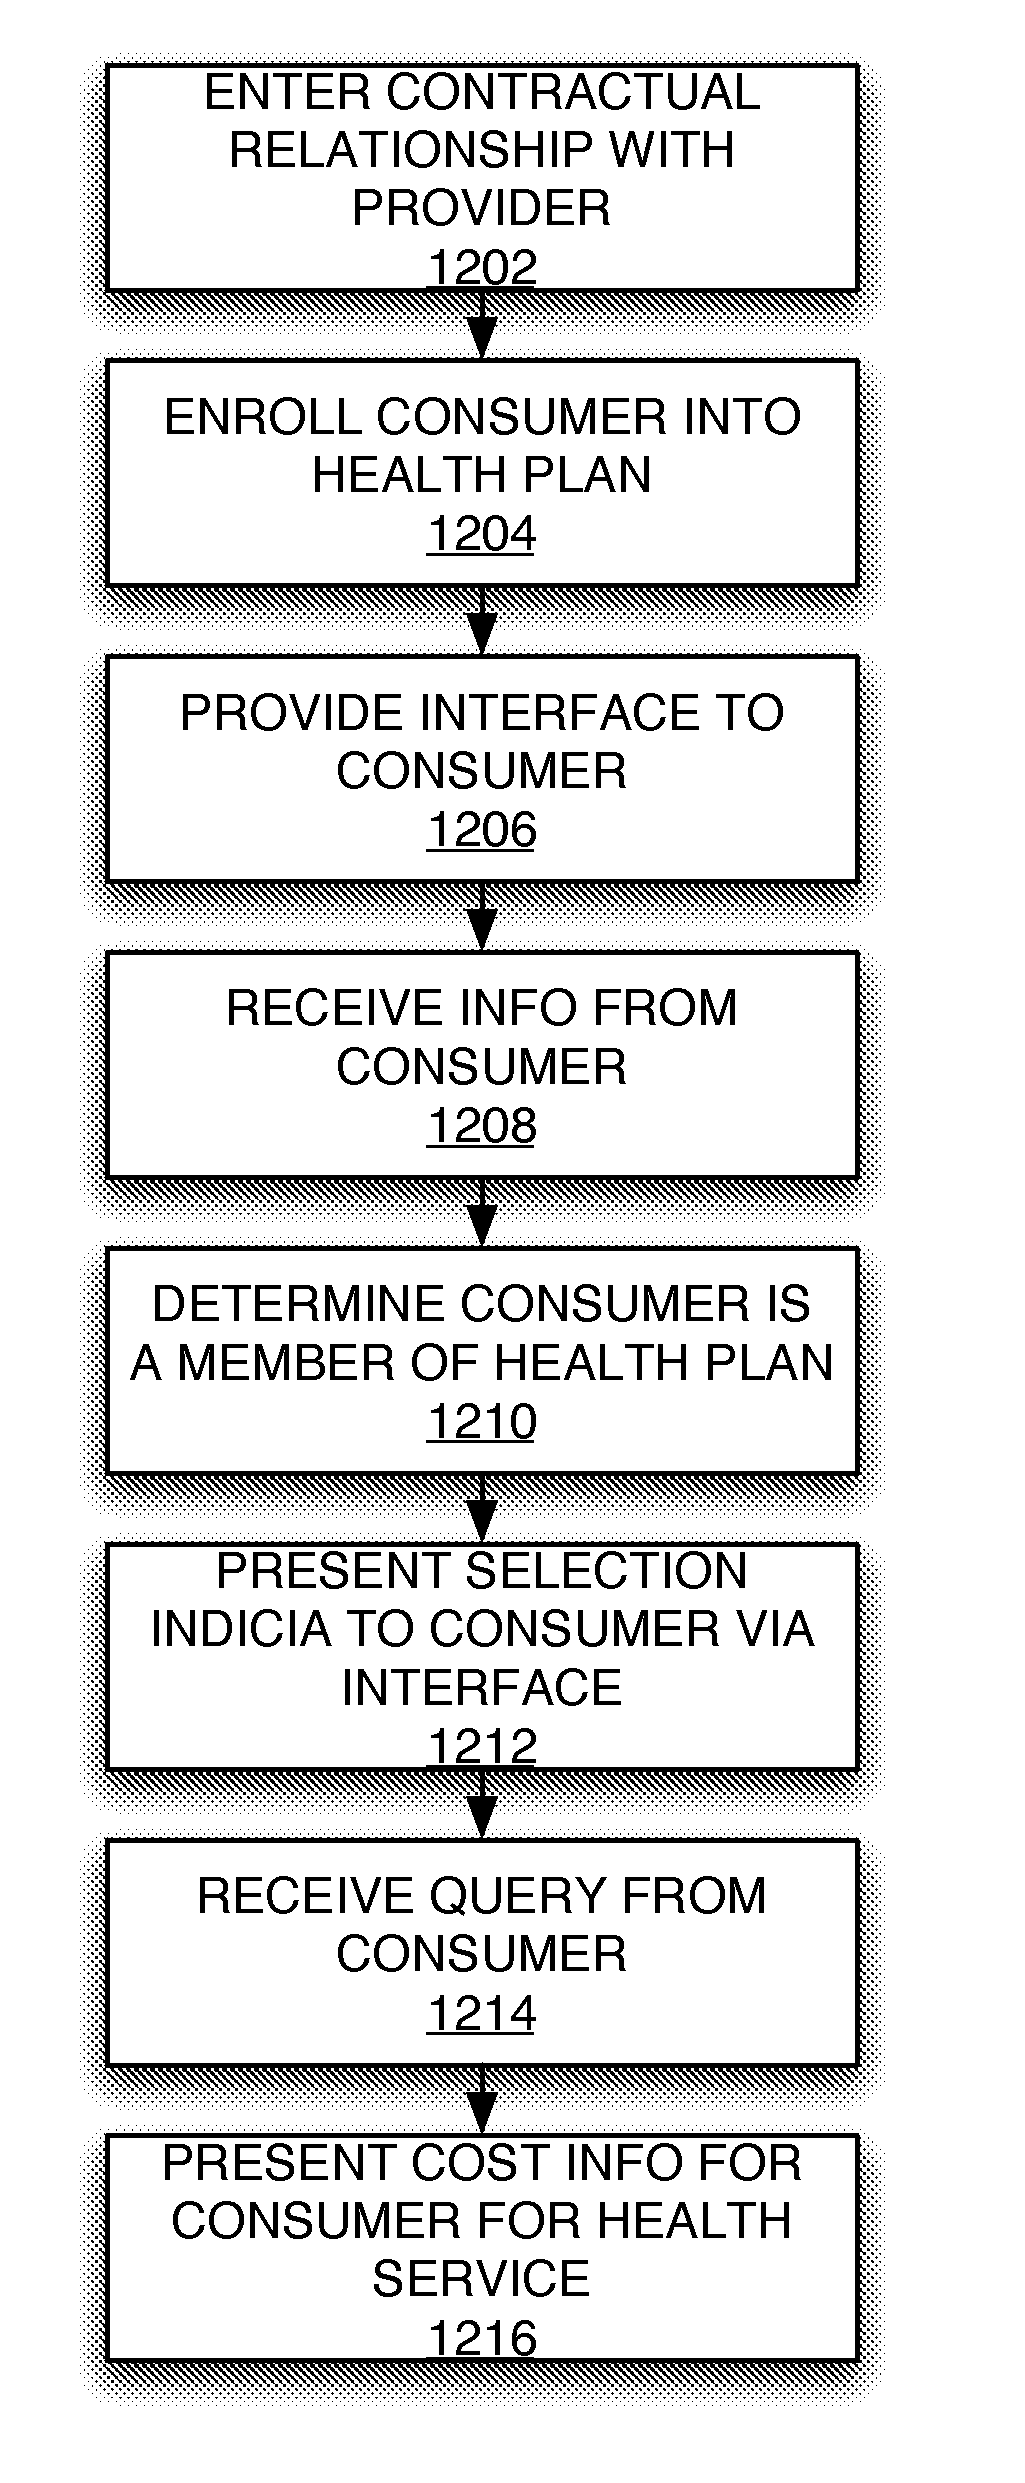 Providing Transparent Health Care Information to Consumers